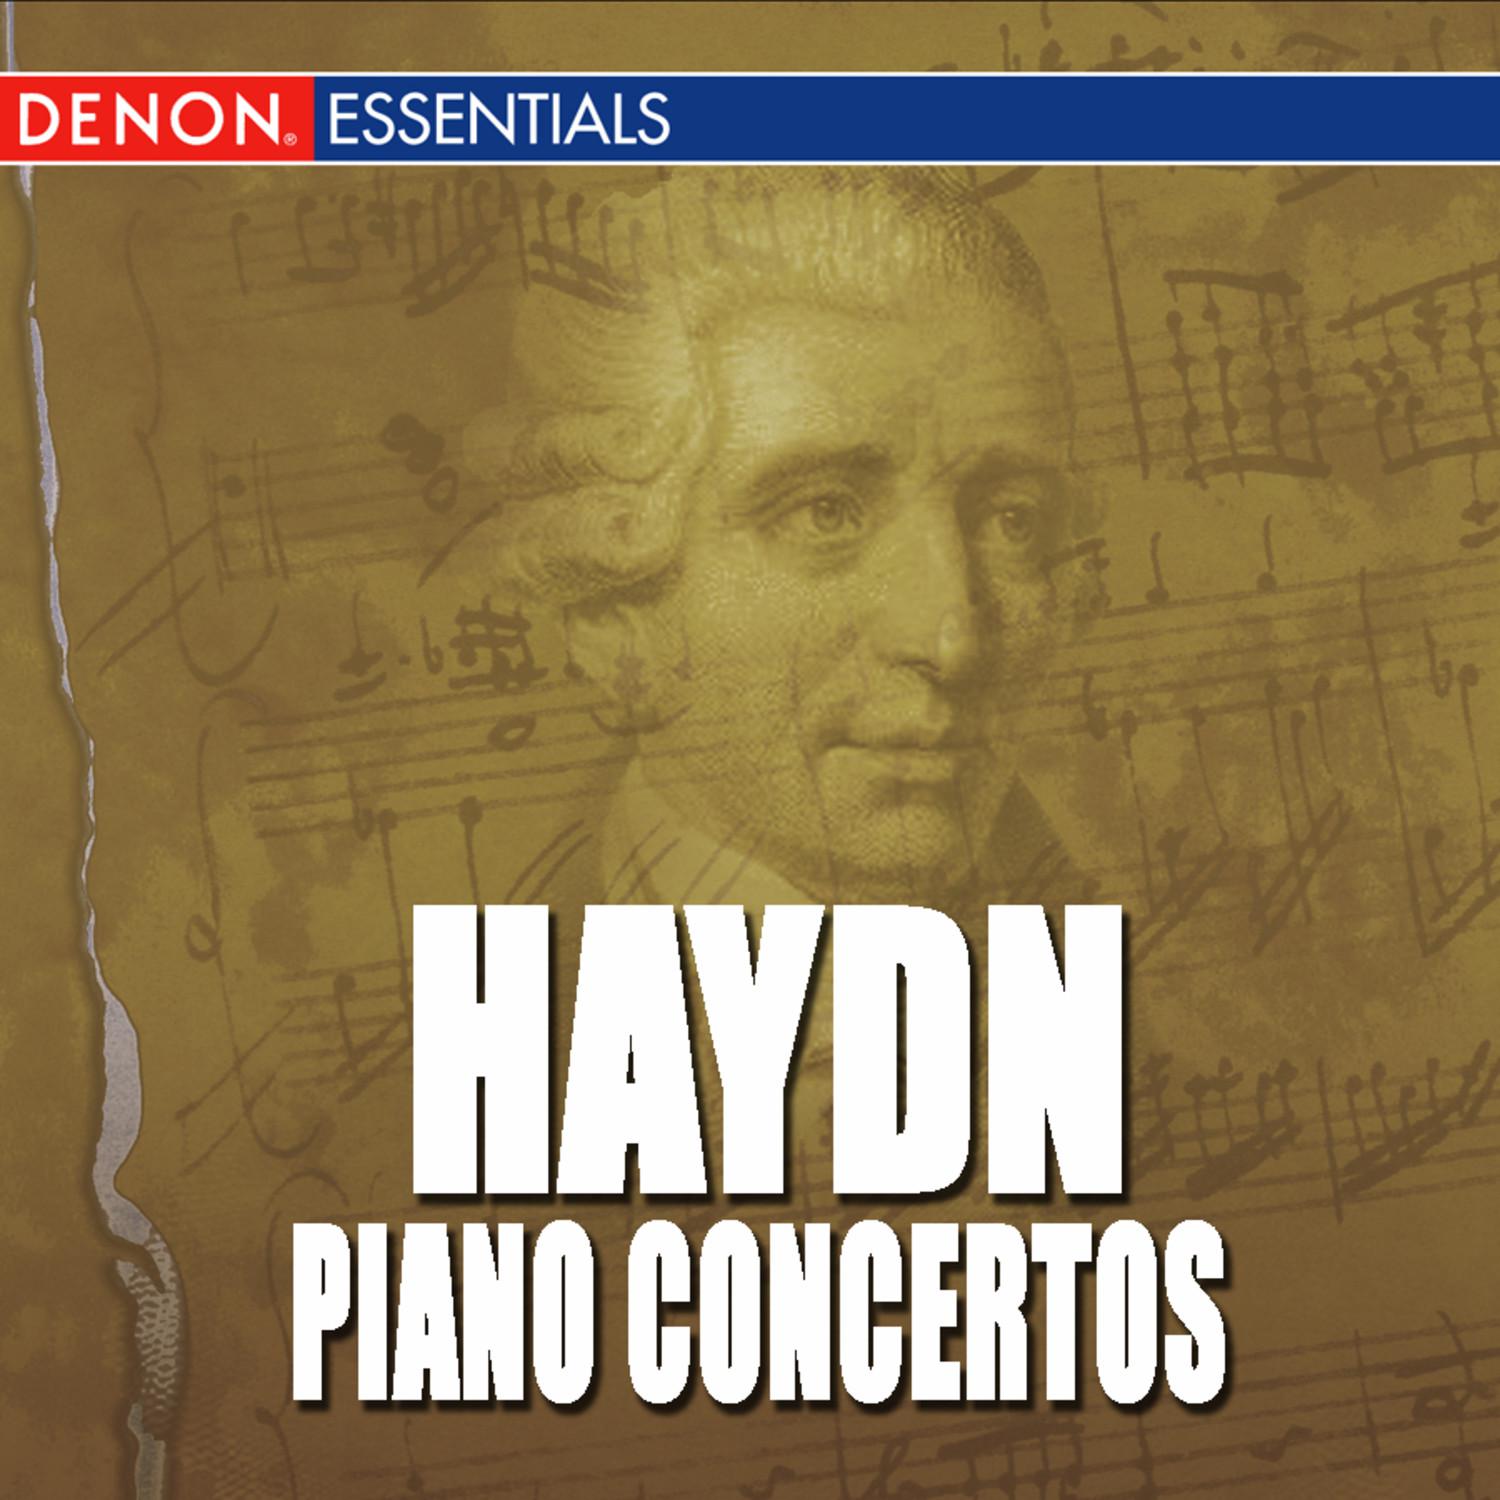 Concerto for Piano and Strings No. 11 in D Major, Op. 21, H 18: III. Rondo All 'Ungarese